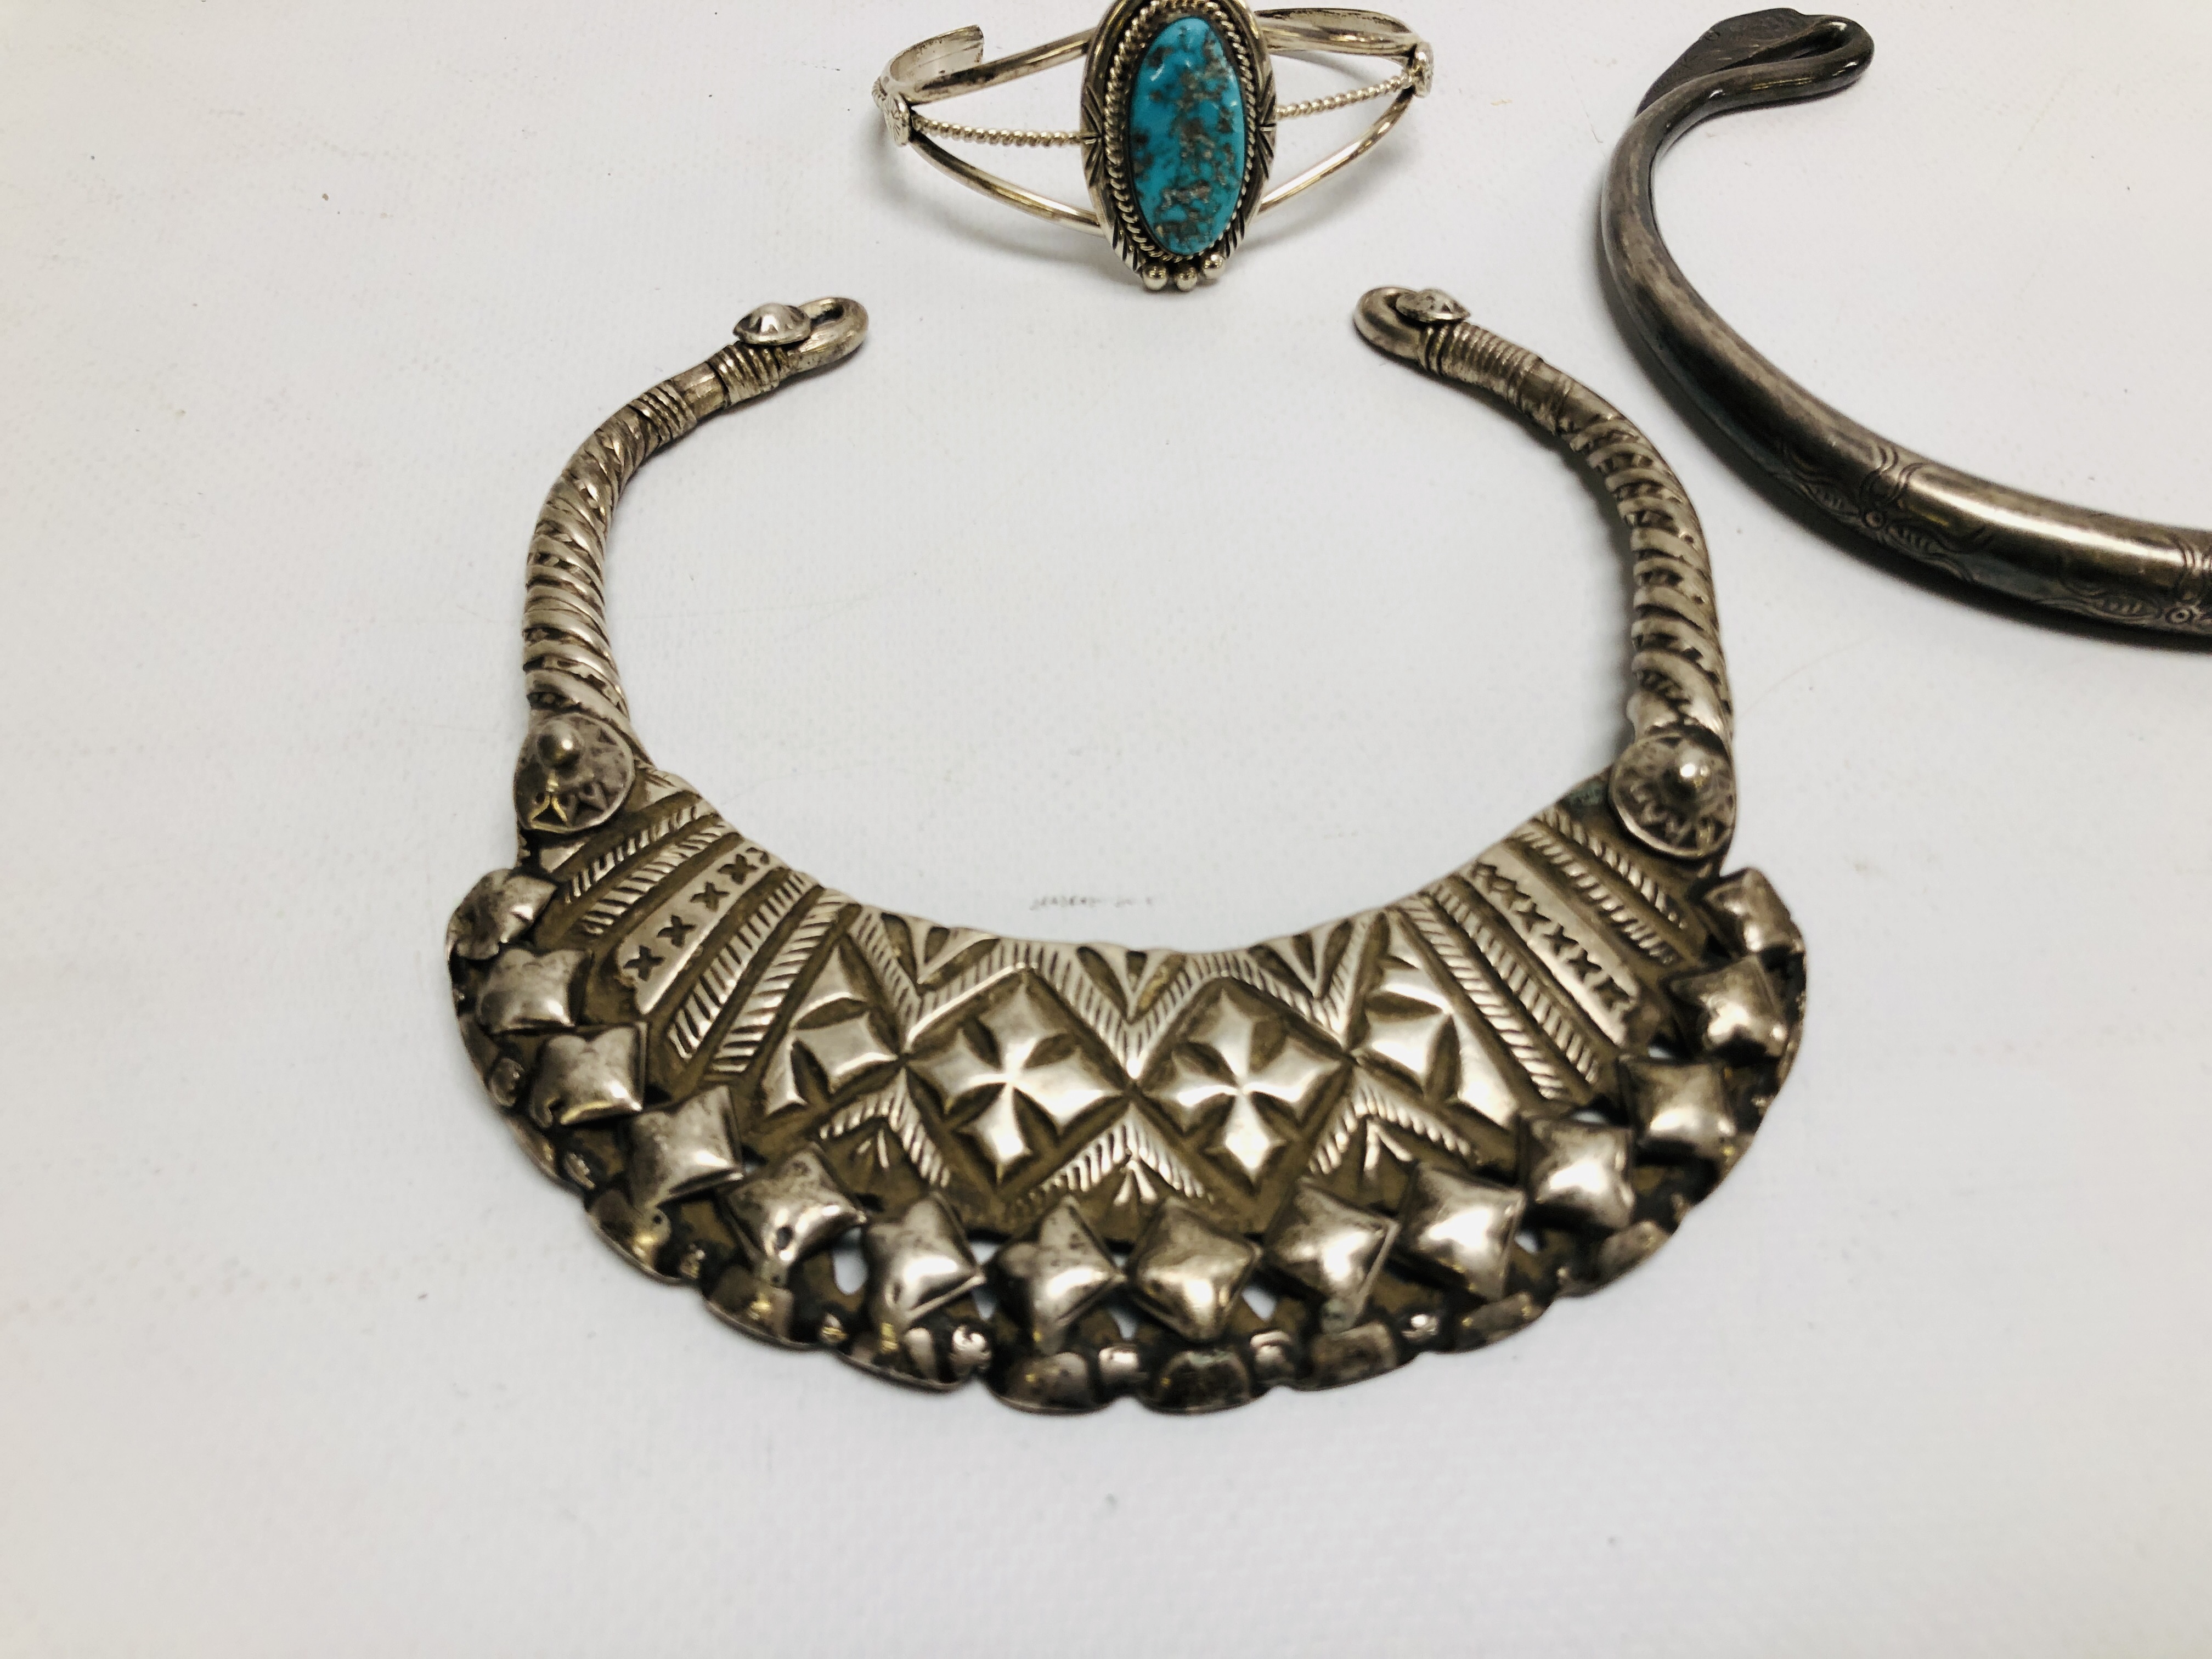 TWO EASTERN TRIBAL STYLE WHITE METAL CUFF / CHOKER NECKLACES OF VARIOUS DESIGNS. - Image 2 of 8